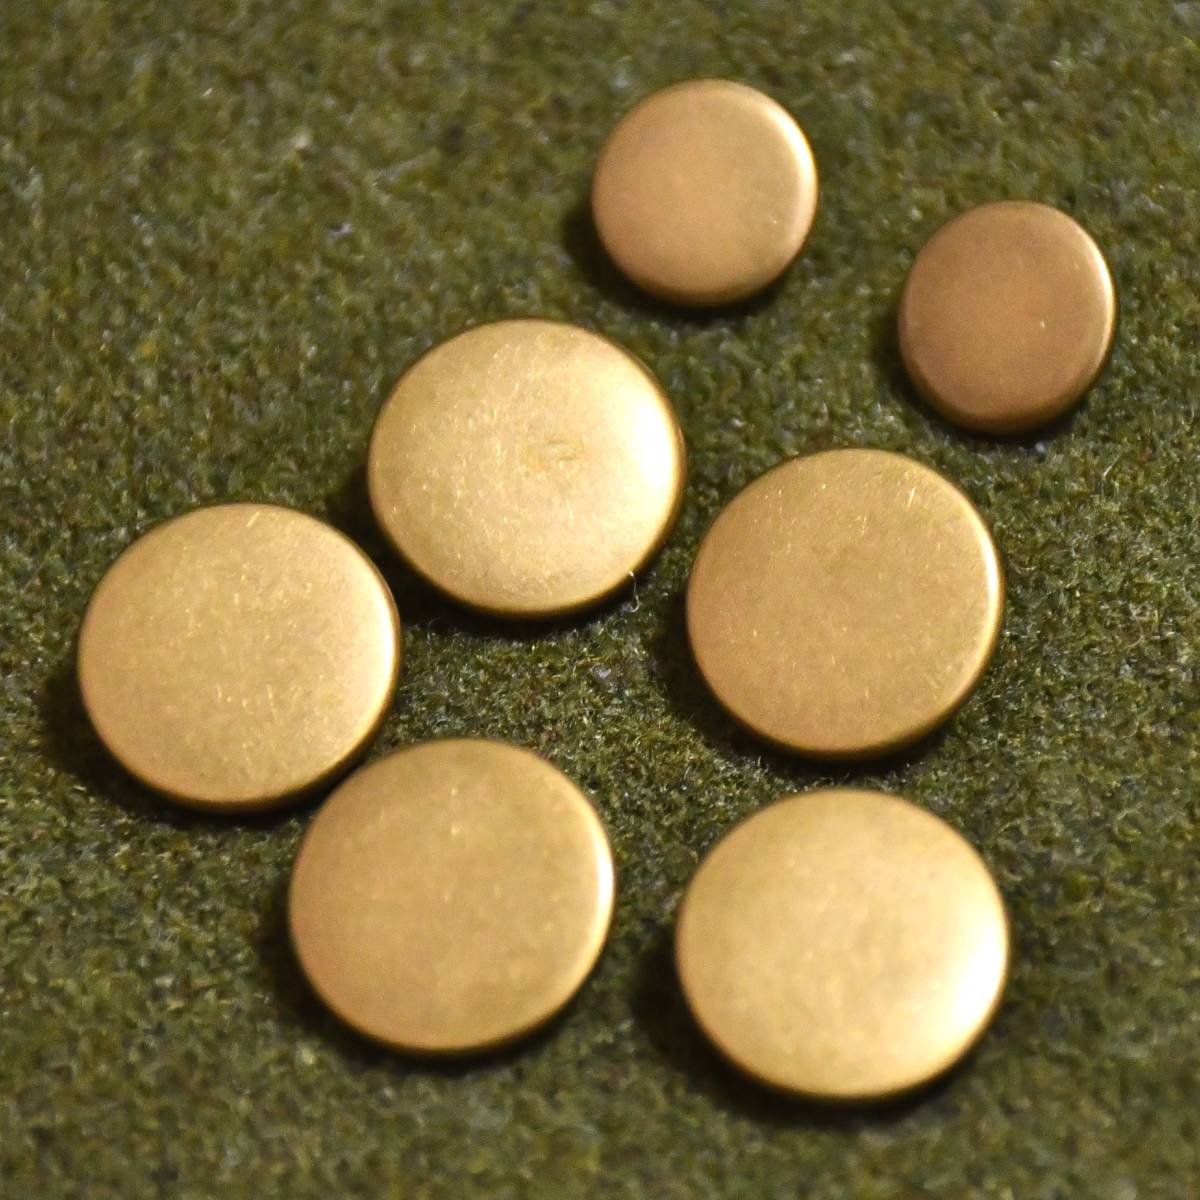  Japan land army substitution button set 